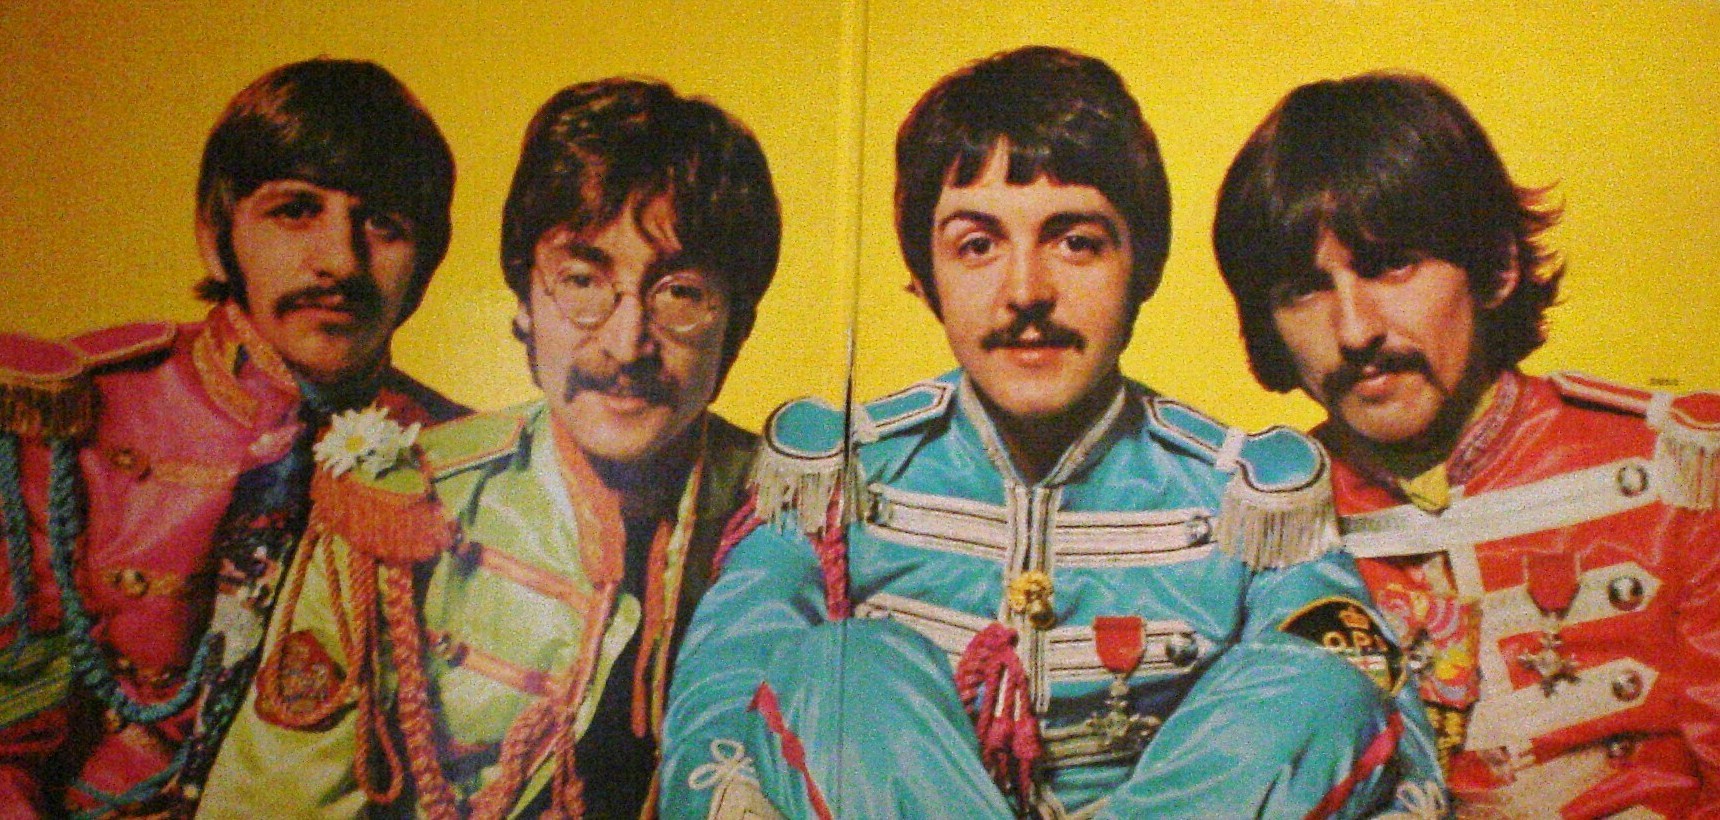 Beatles sgt pepper lonely. Битлз сержант Пеппер. Sgt Pepper s Lonely Hearts Club Band. Sgt. Pepper's Lonely Hearts Club Band Битлз. Sgt Pepper 1967.